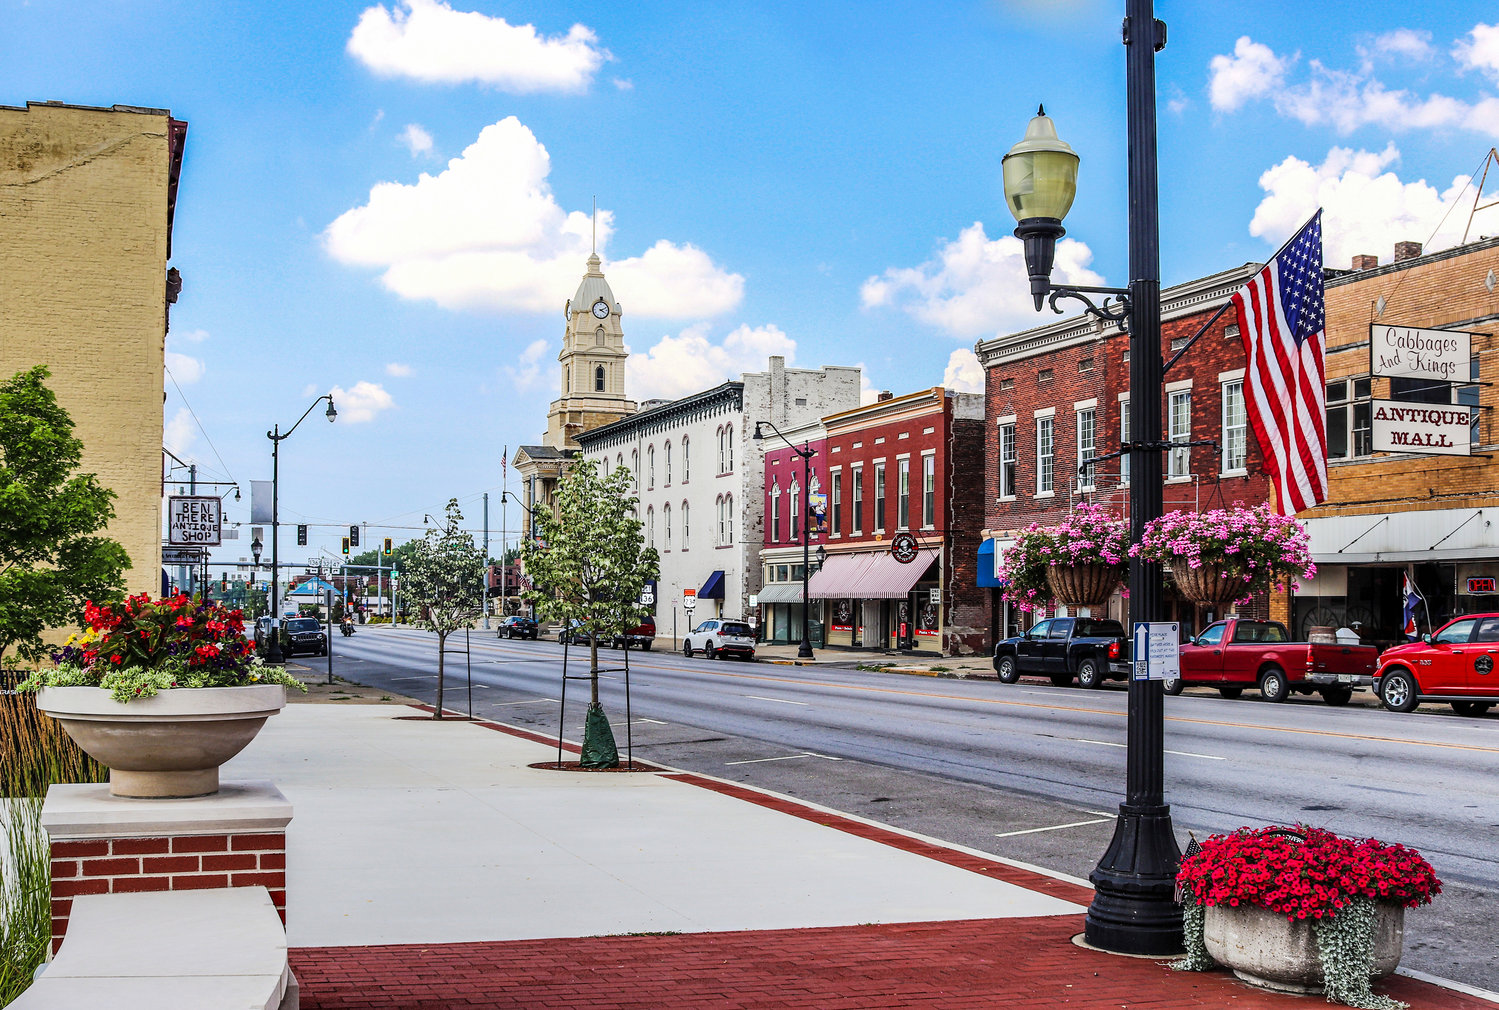 A view of downtown Crawfordsville looking north along Washington Street near Pike Street.